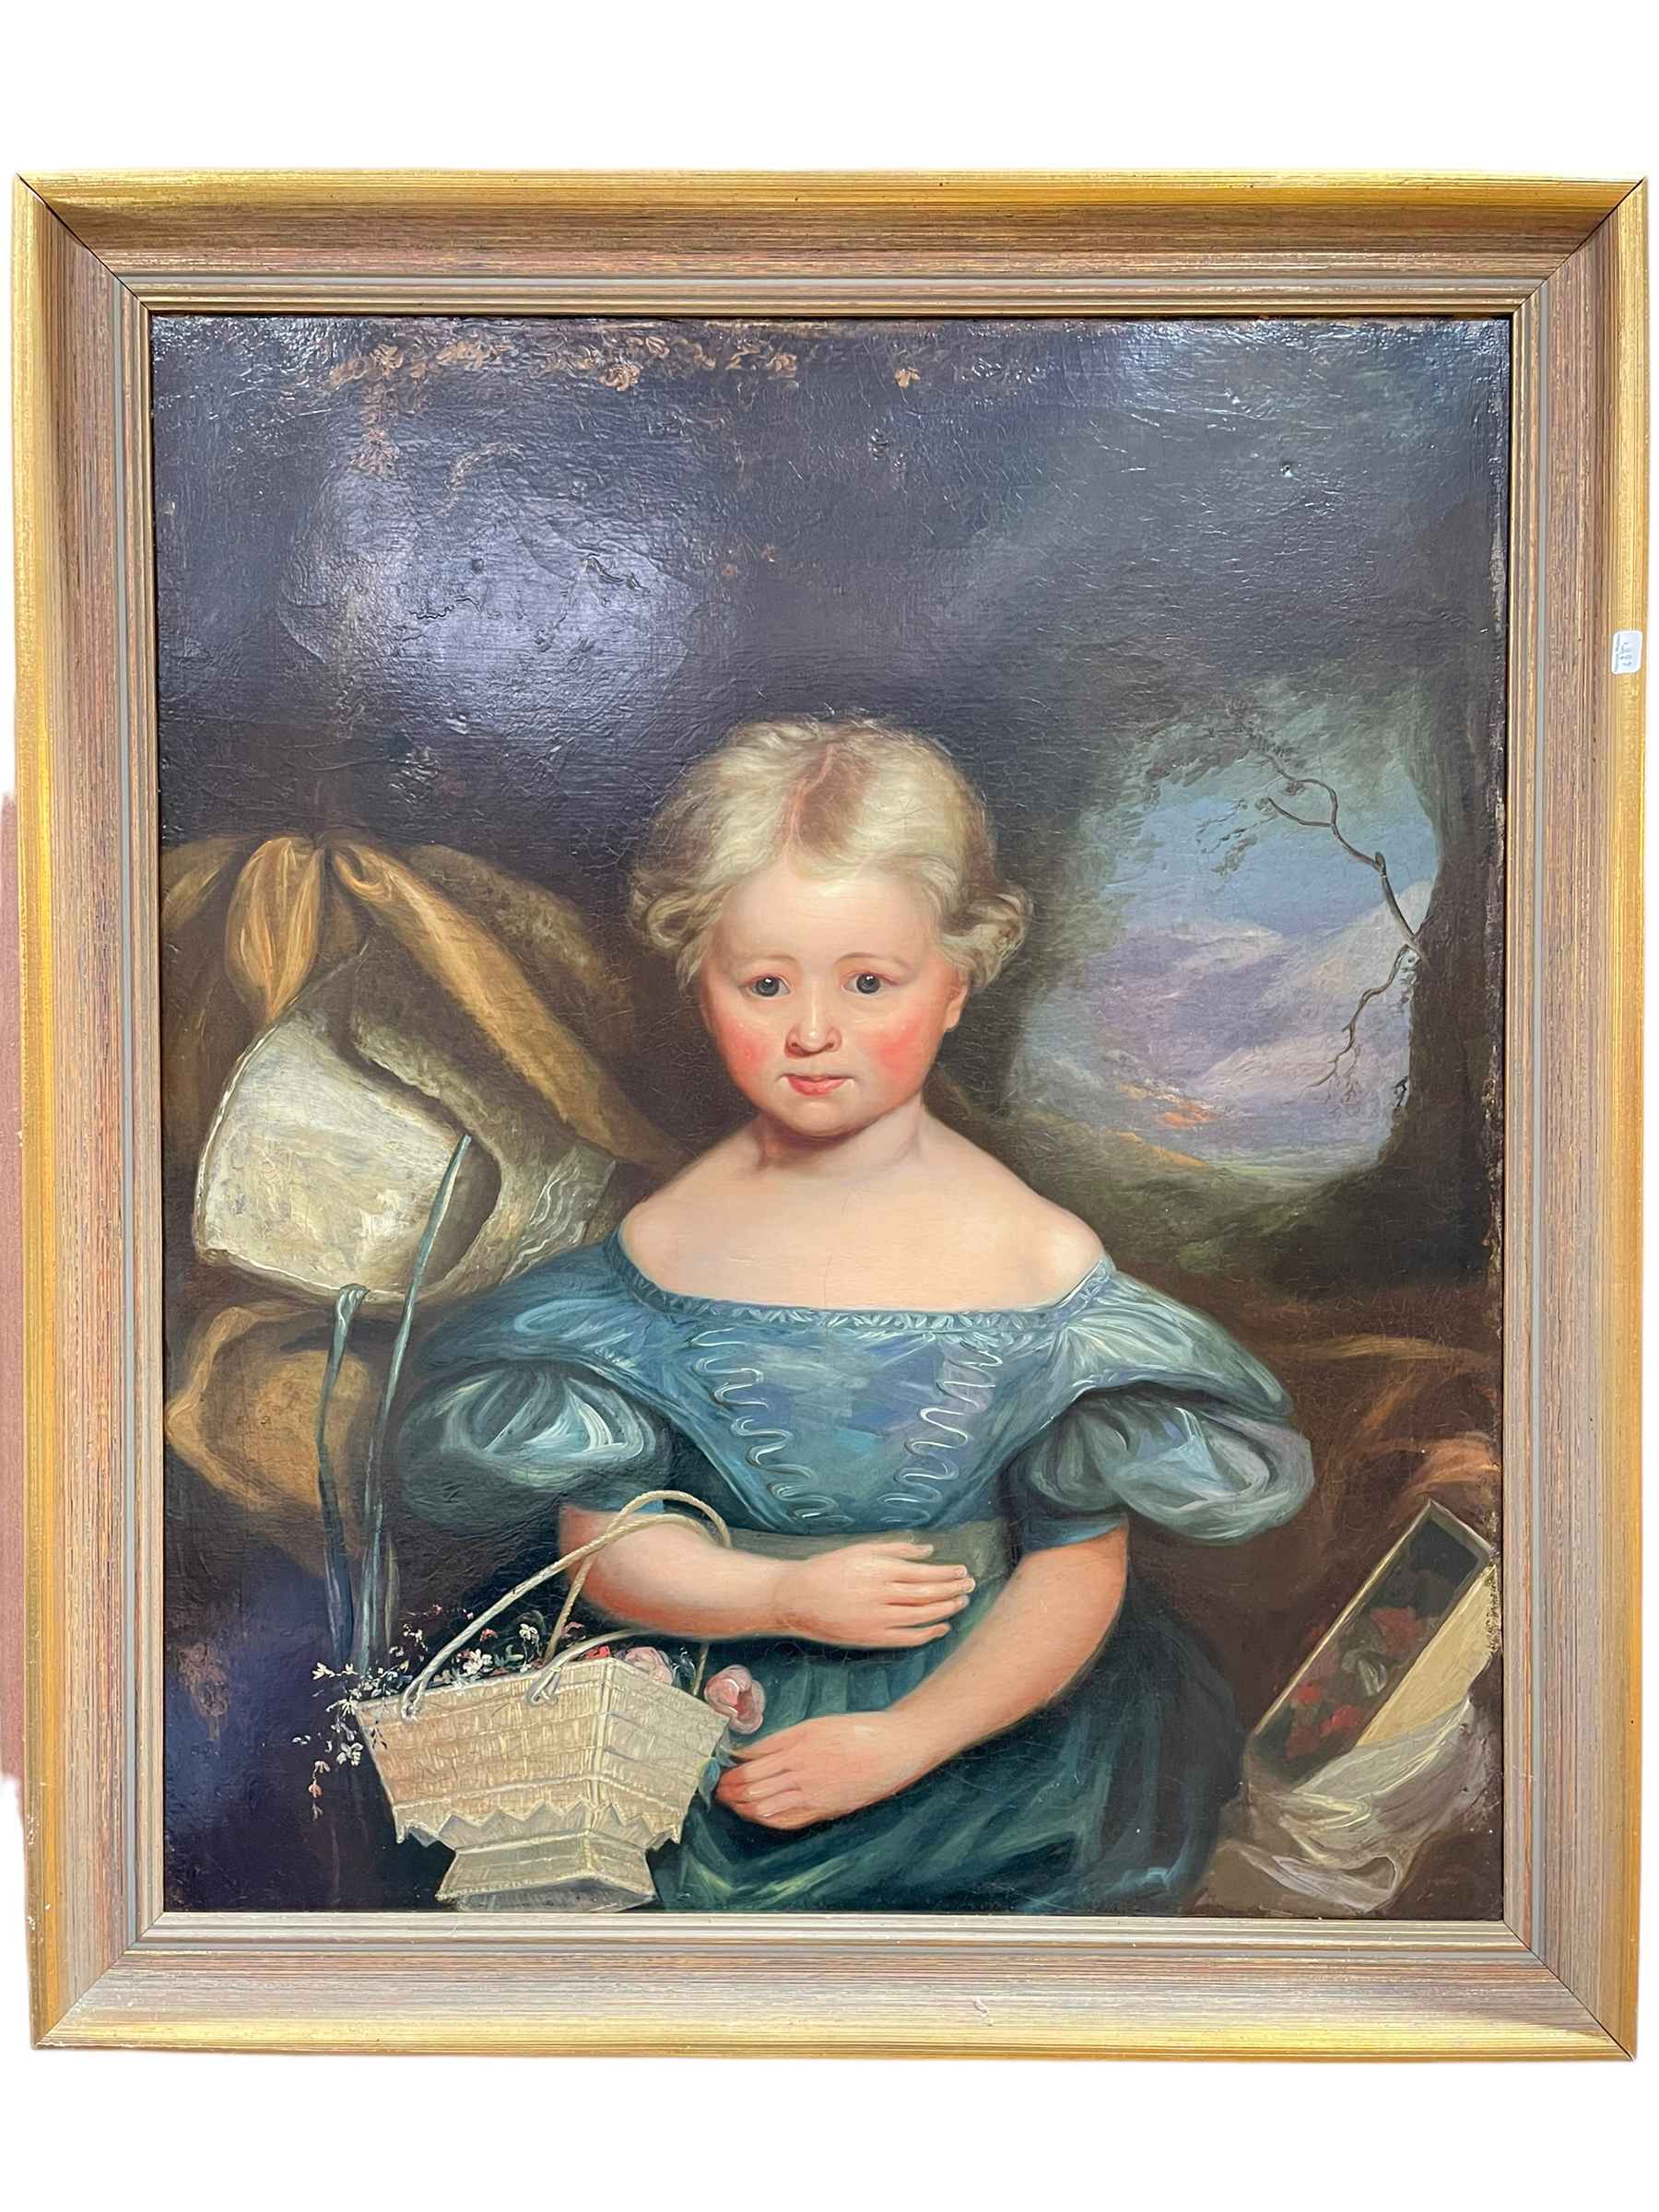 19th Century portrait of a young girl, oil on canvas, 78cm by 67cm, framed.